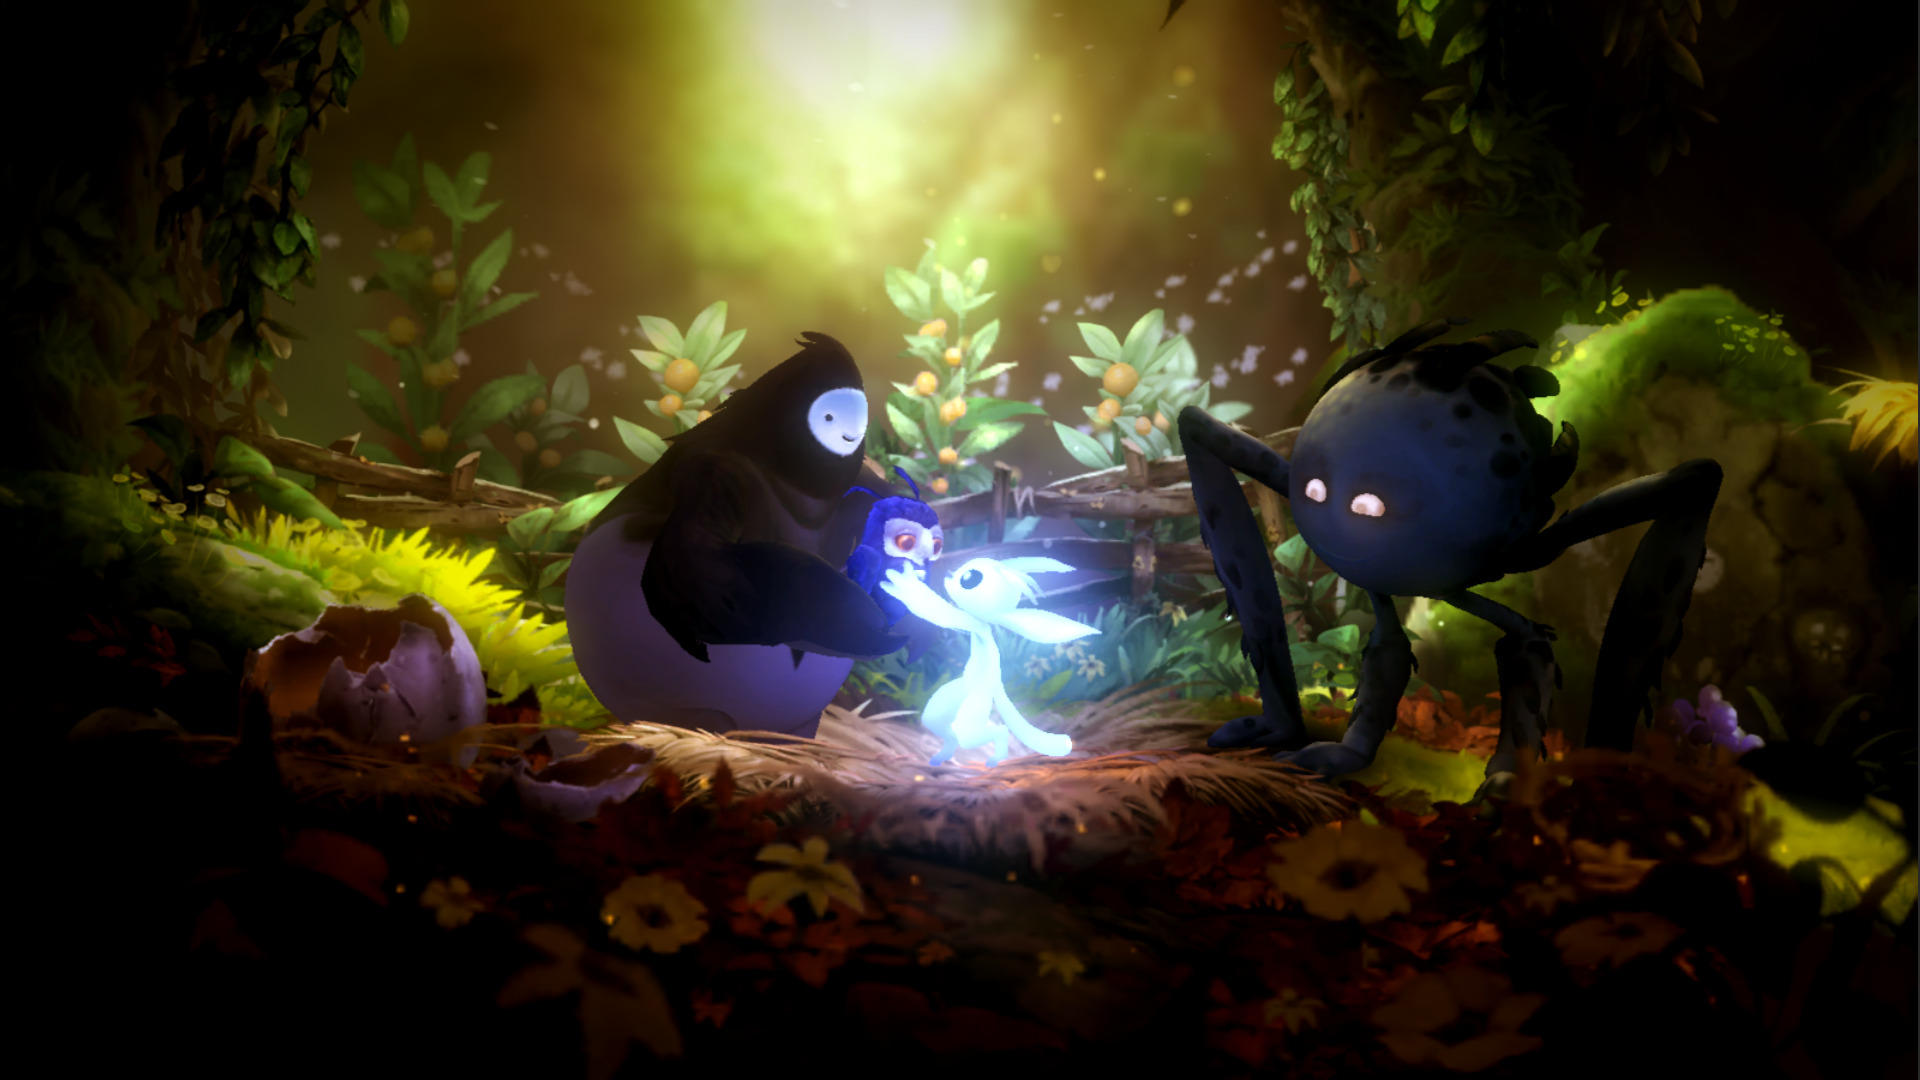 Moon Studios On Ori And The Will Of The Wisps' Journey From Xbox